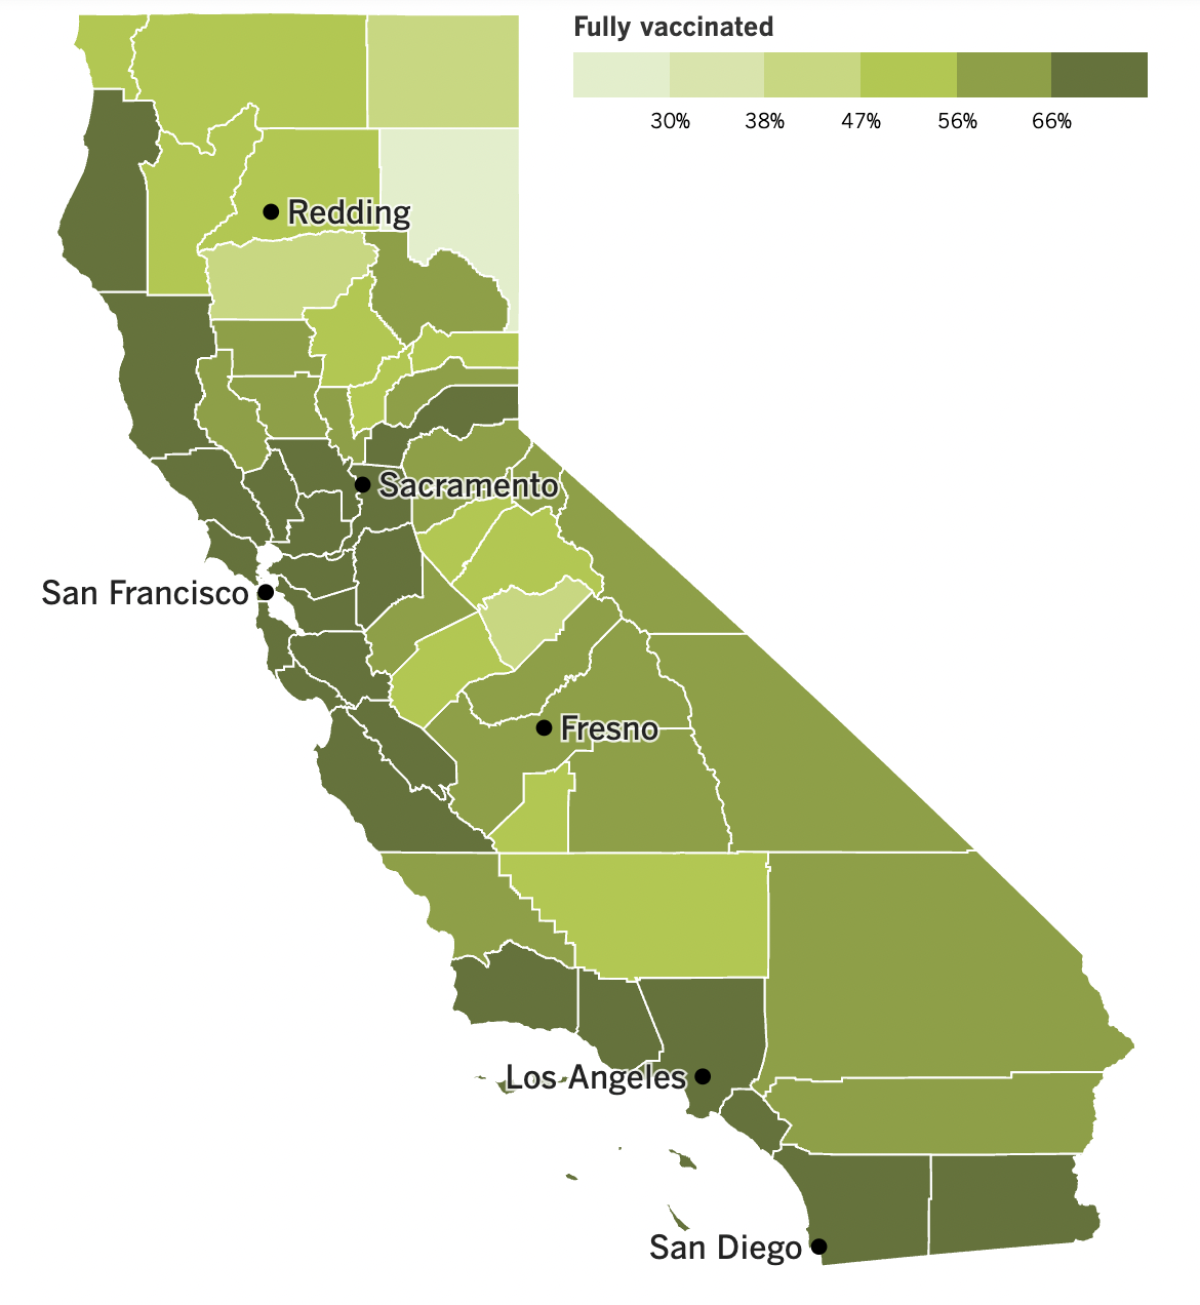 A map showing California's COVID-19 vaccination progress by county as of Oct. 25, 2022.